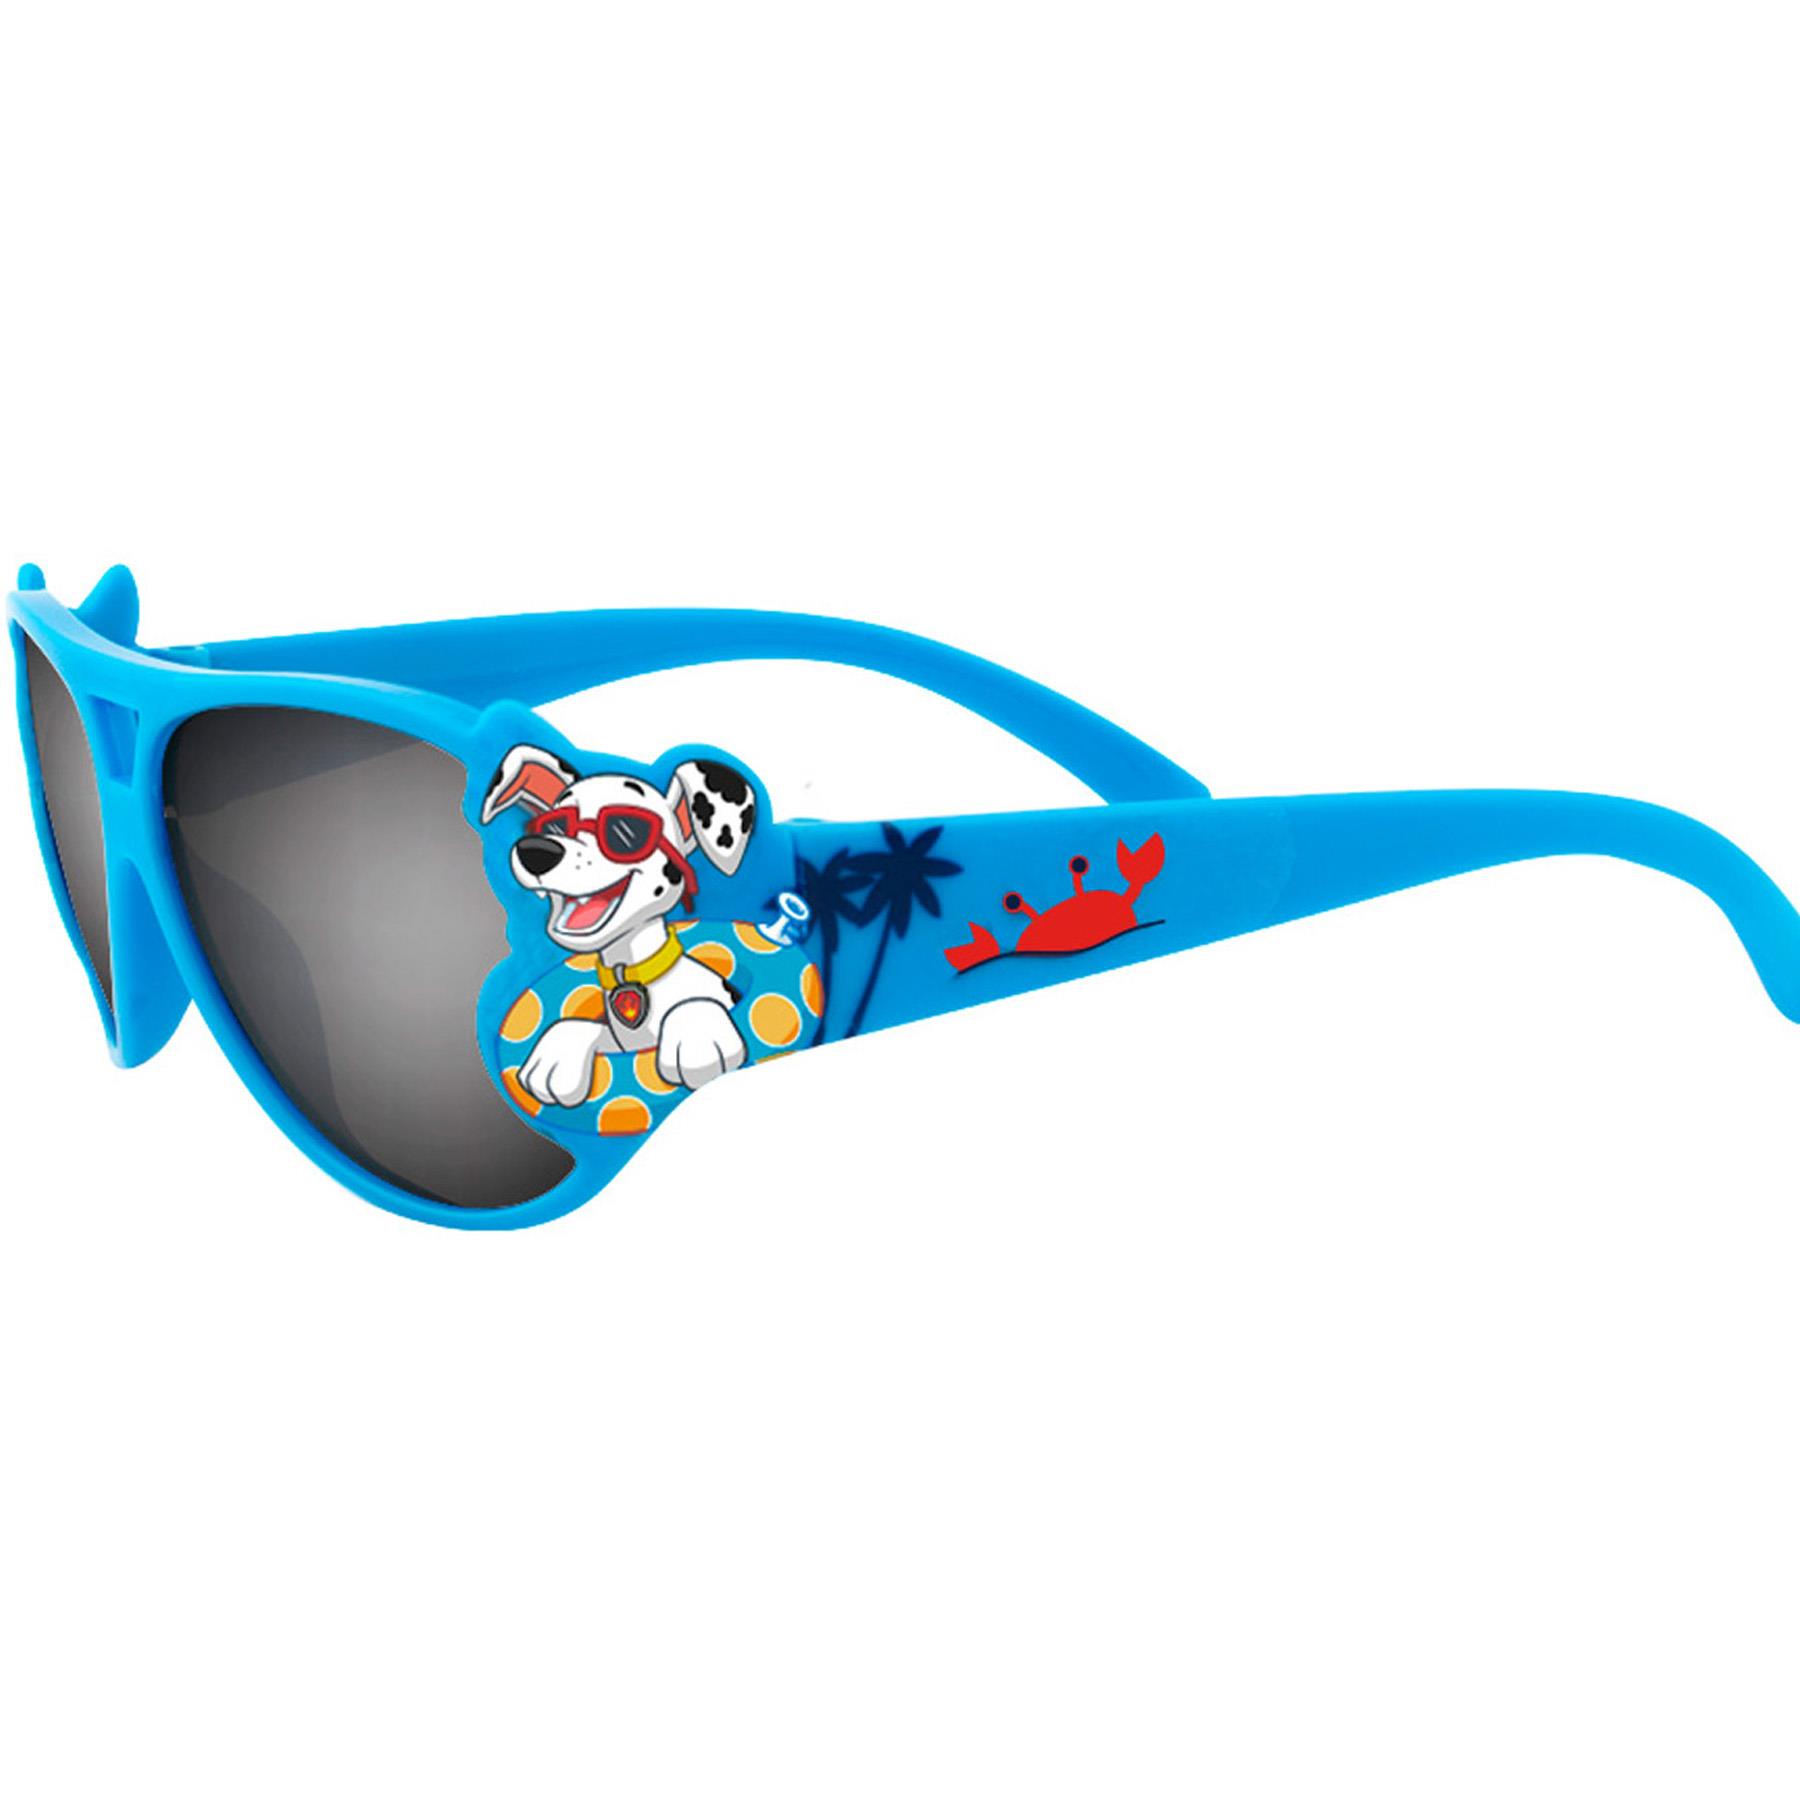 Paw Patrol Children's Sunglasses UV protection for Holiday - PAW7